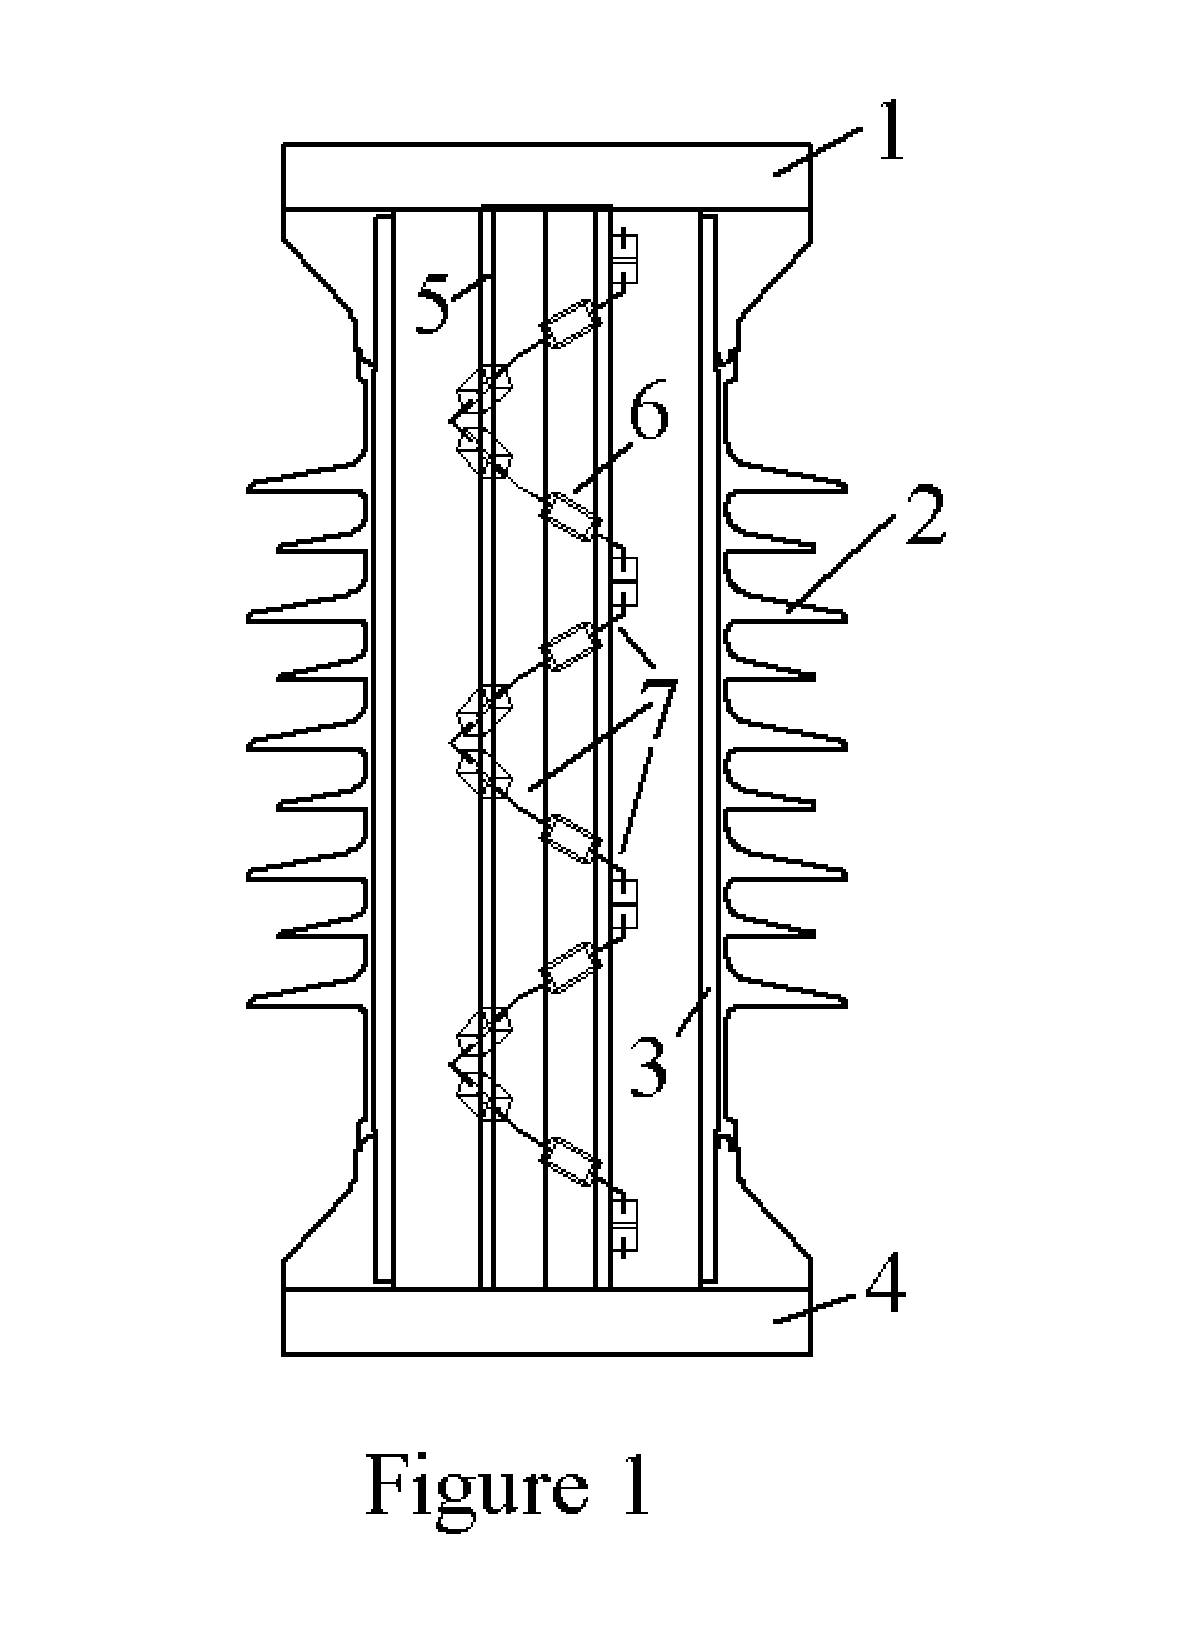 Voltage sensor and dielectric material